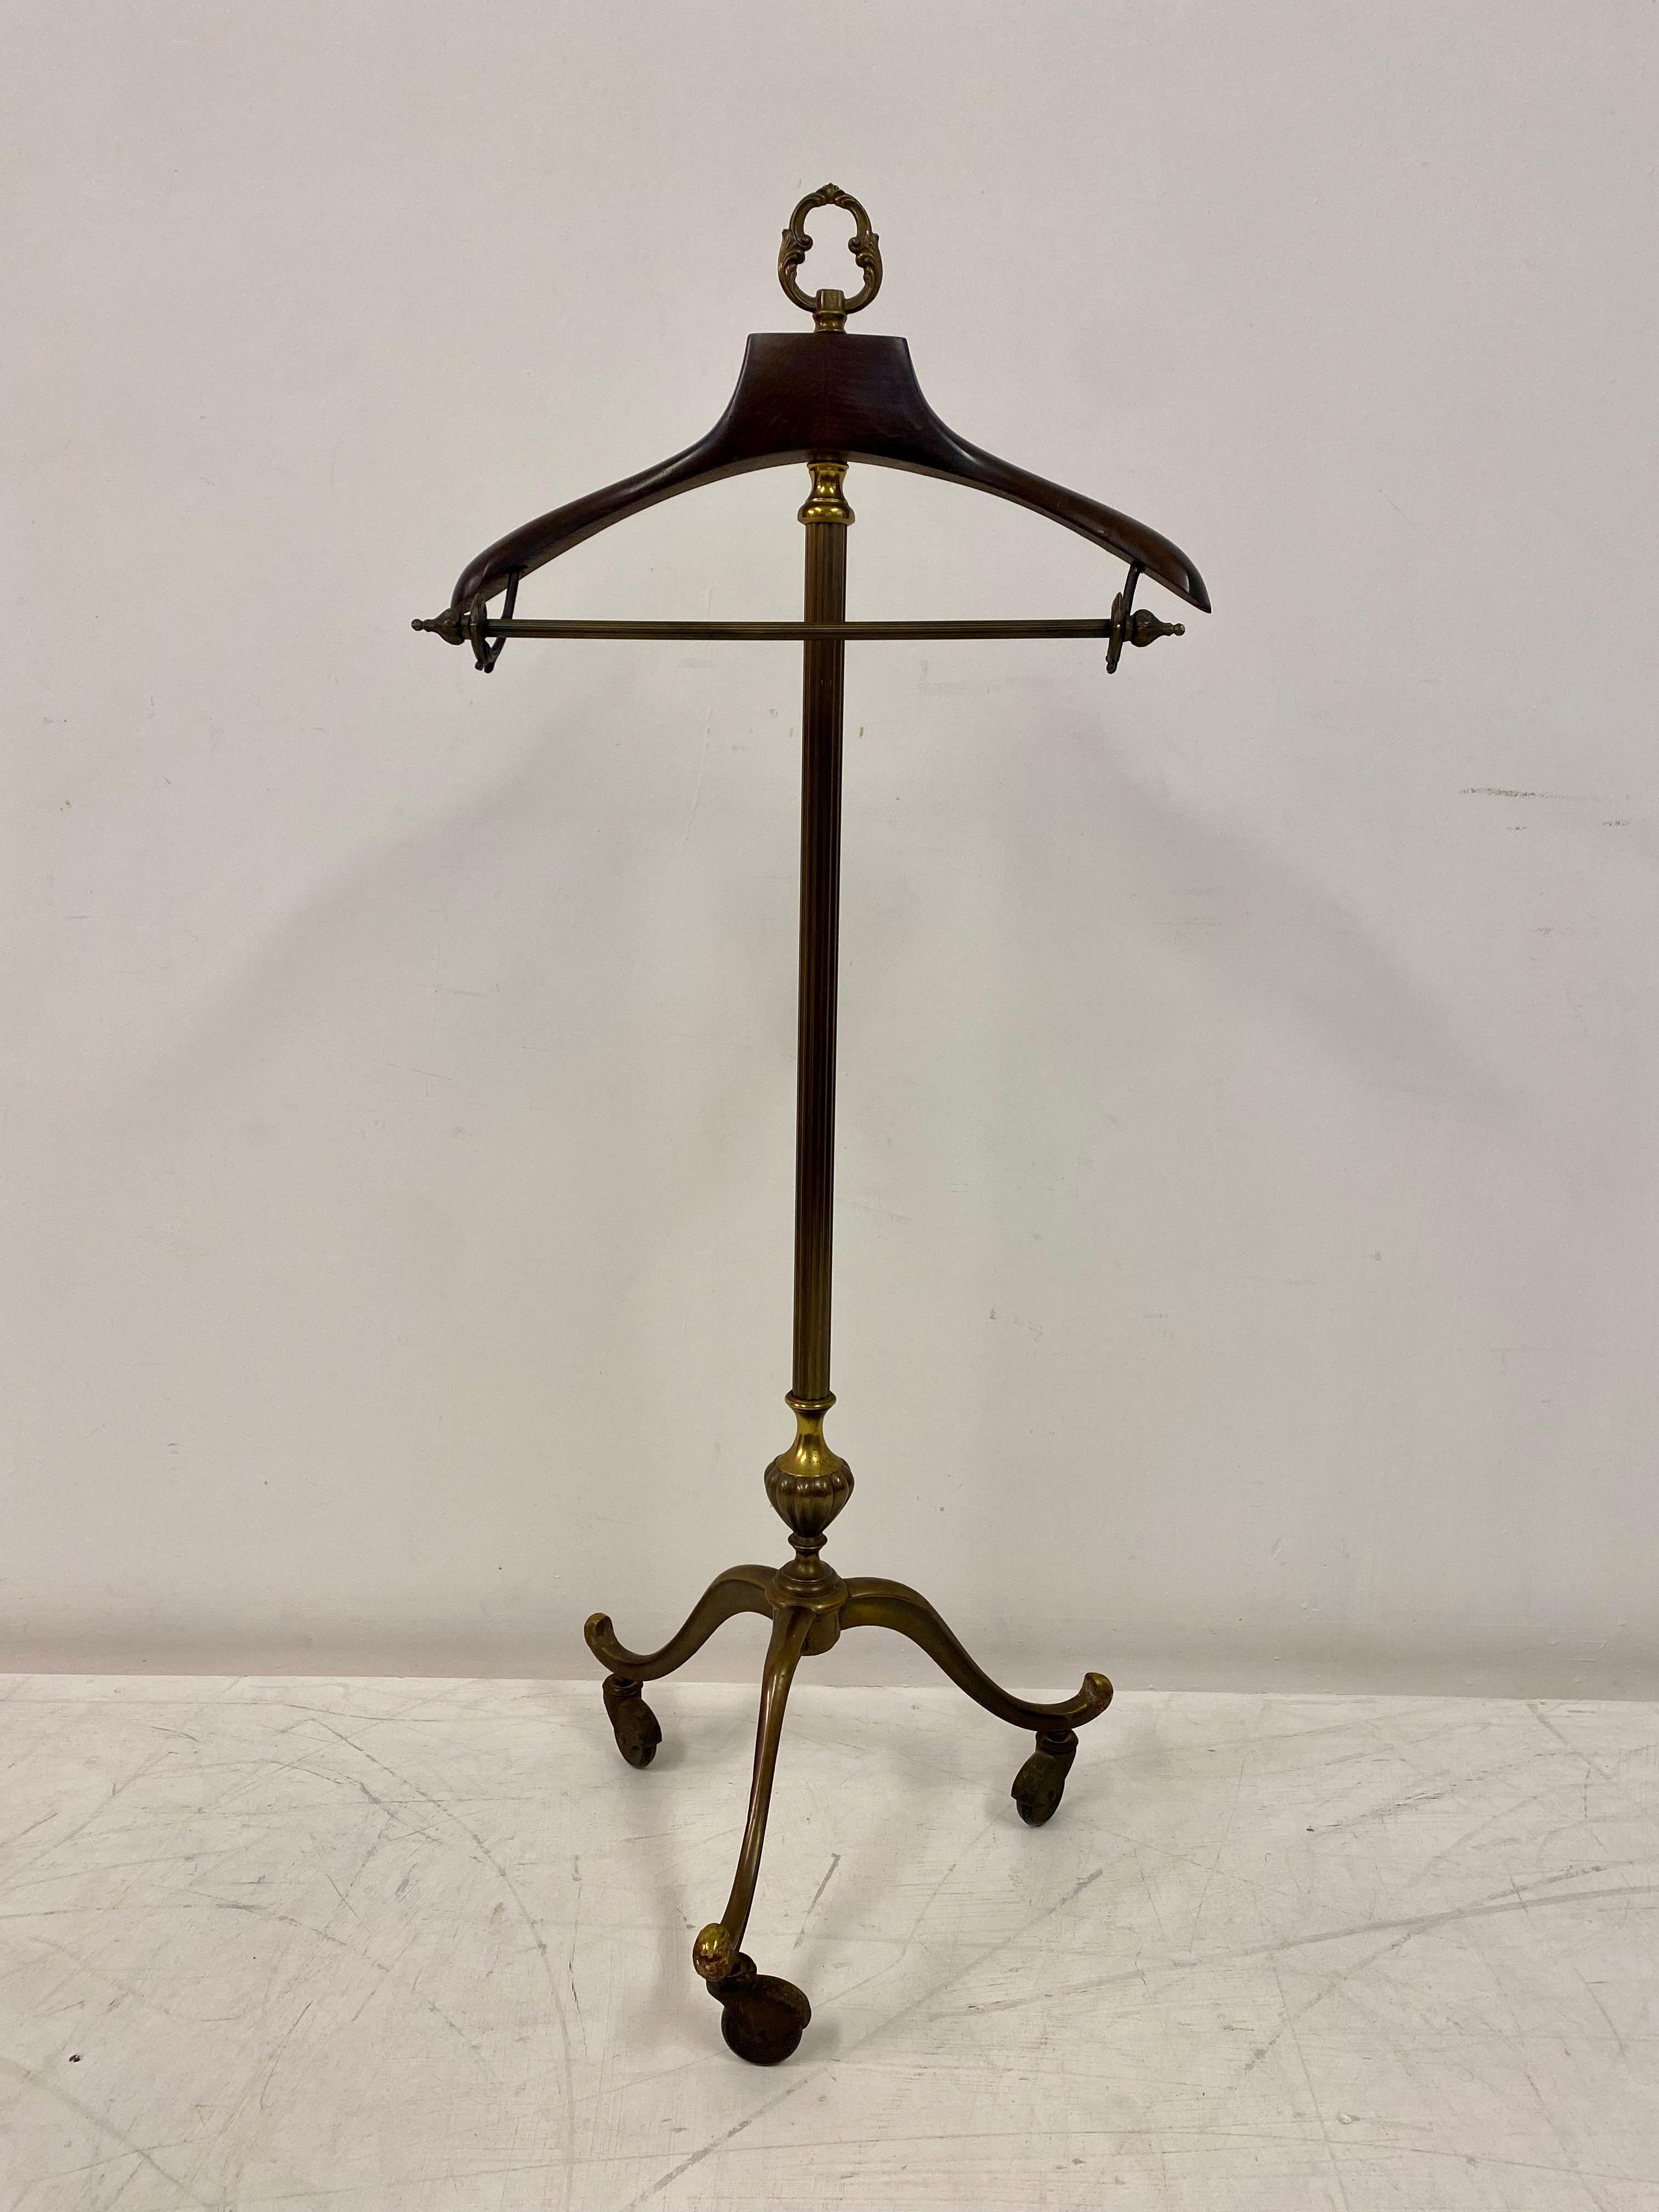 Valet stand

Brass frame

Mahogany hanger

On casters

Early 20th Century Italy.